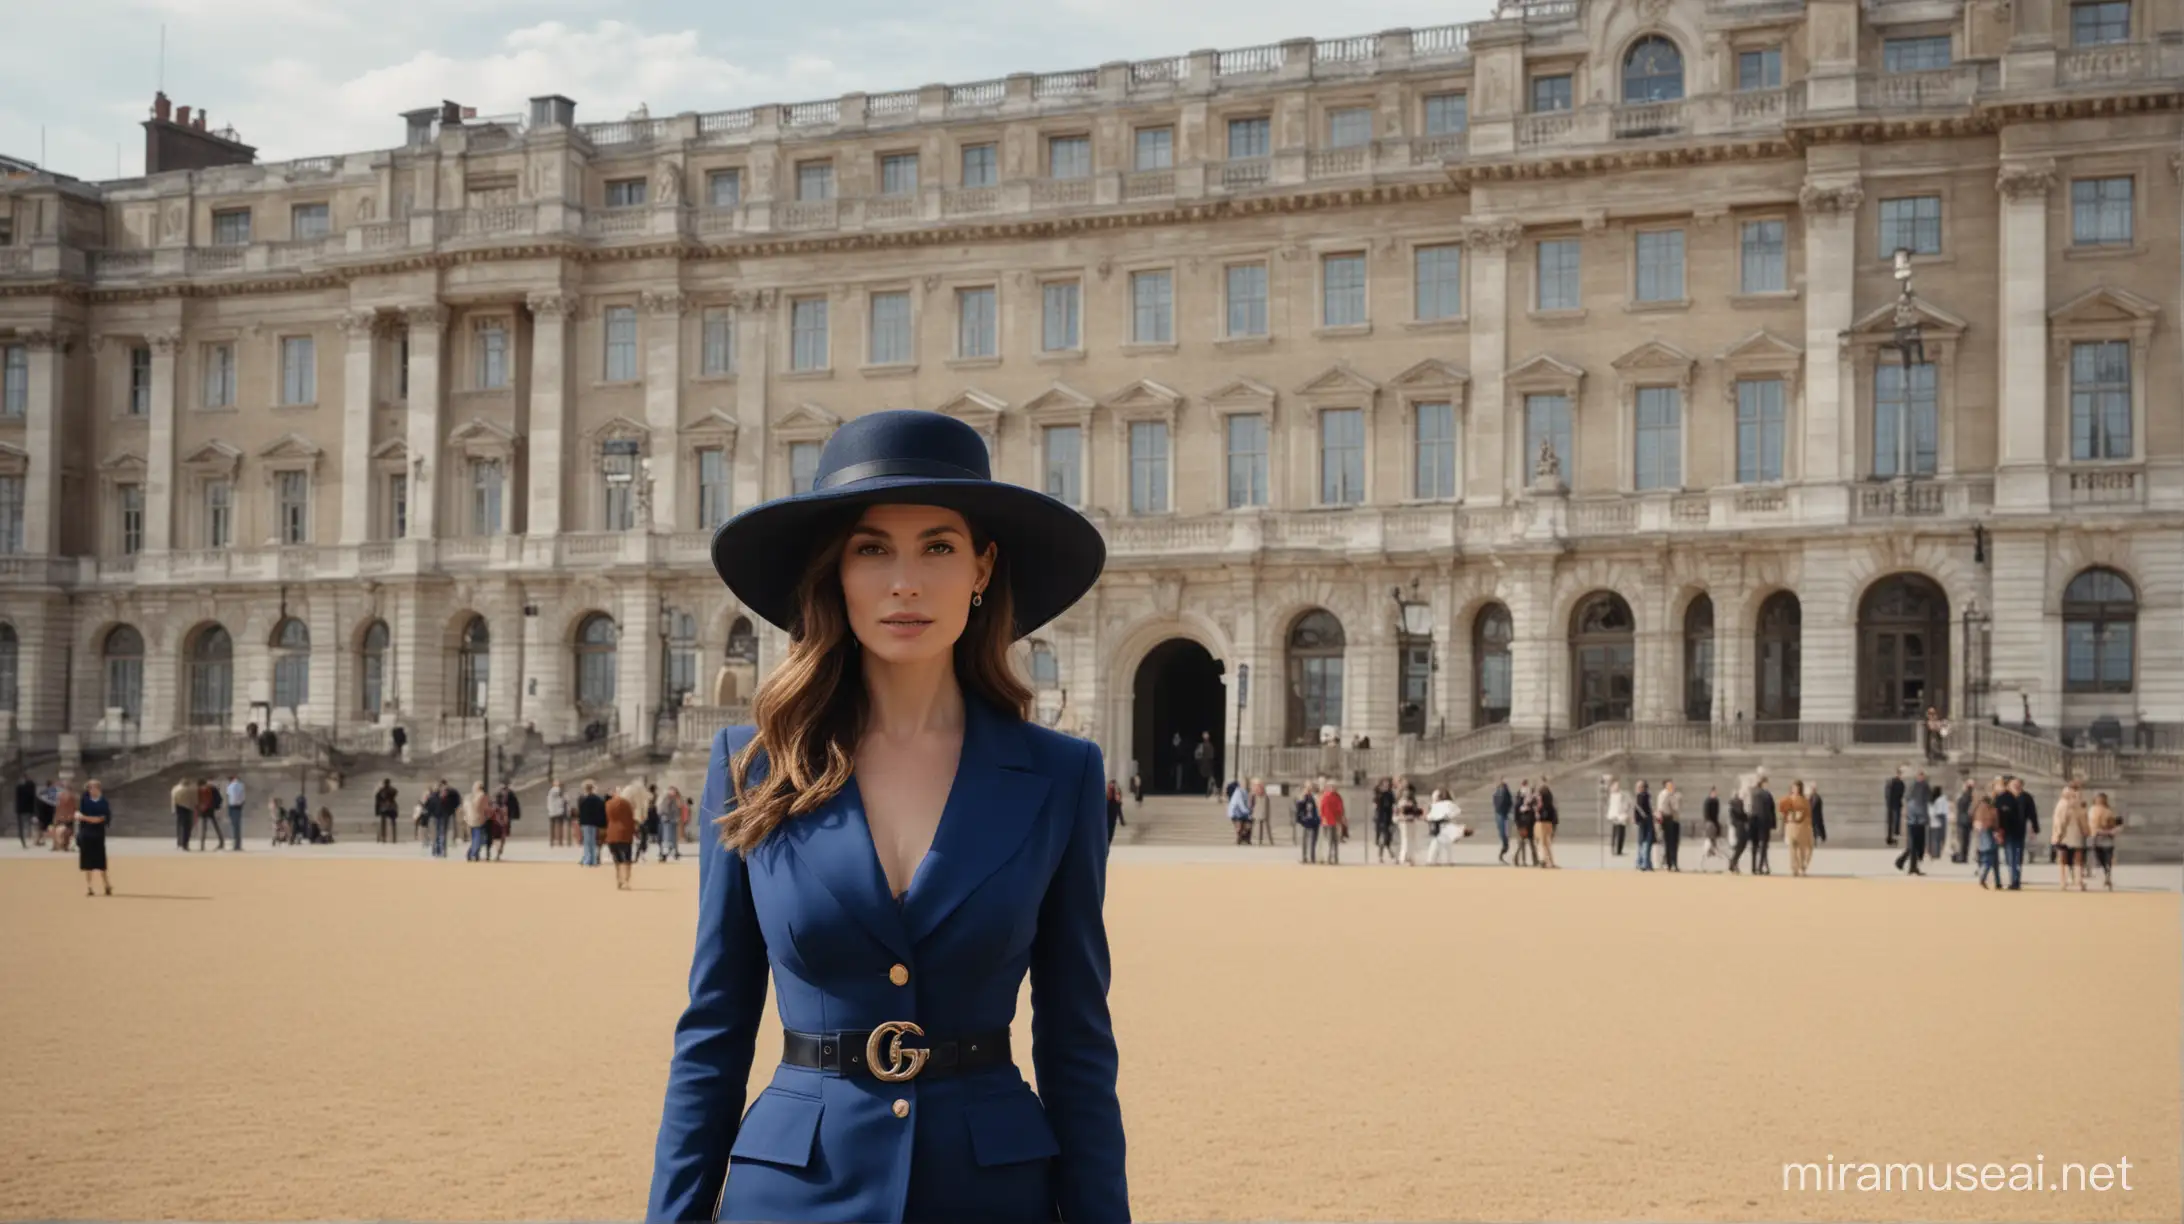 35 years old mature woman. She wears blue push-up and black wide wavy hat from Gucci. She is locating at London where she is standing behind the Buckhinam Palace.